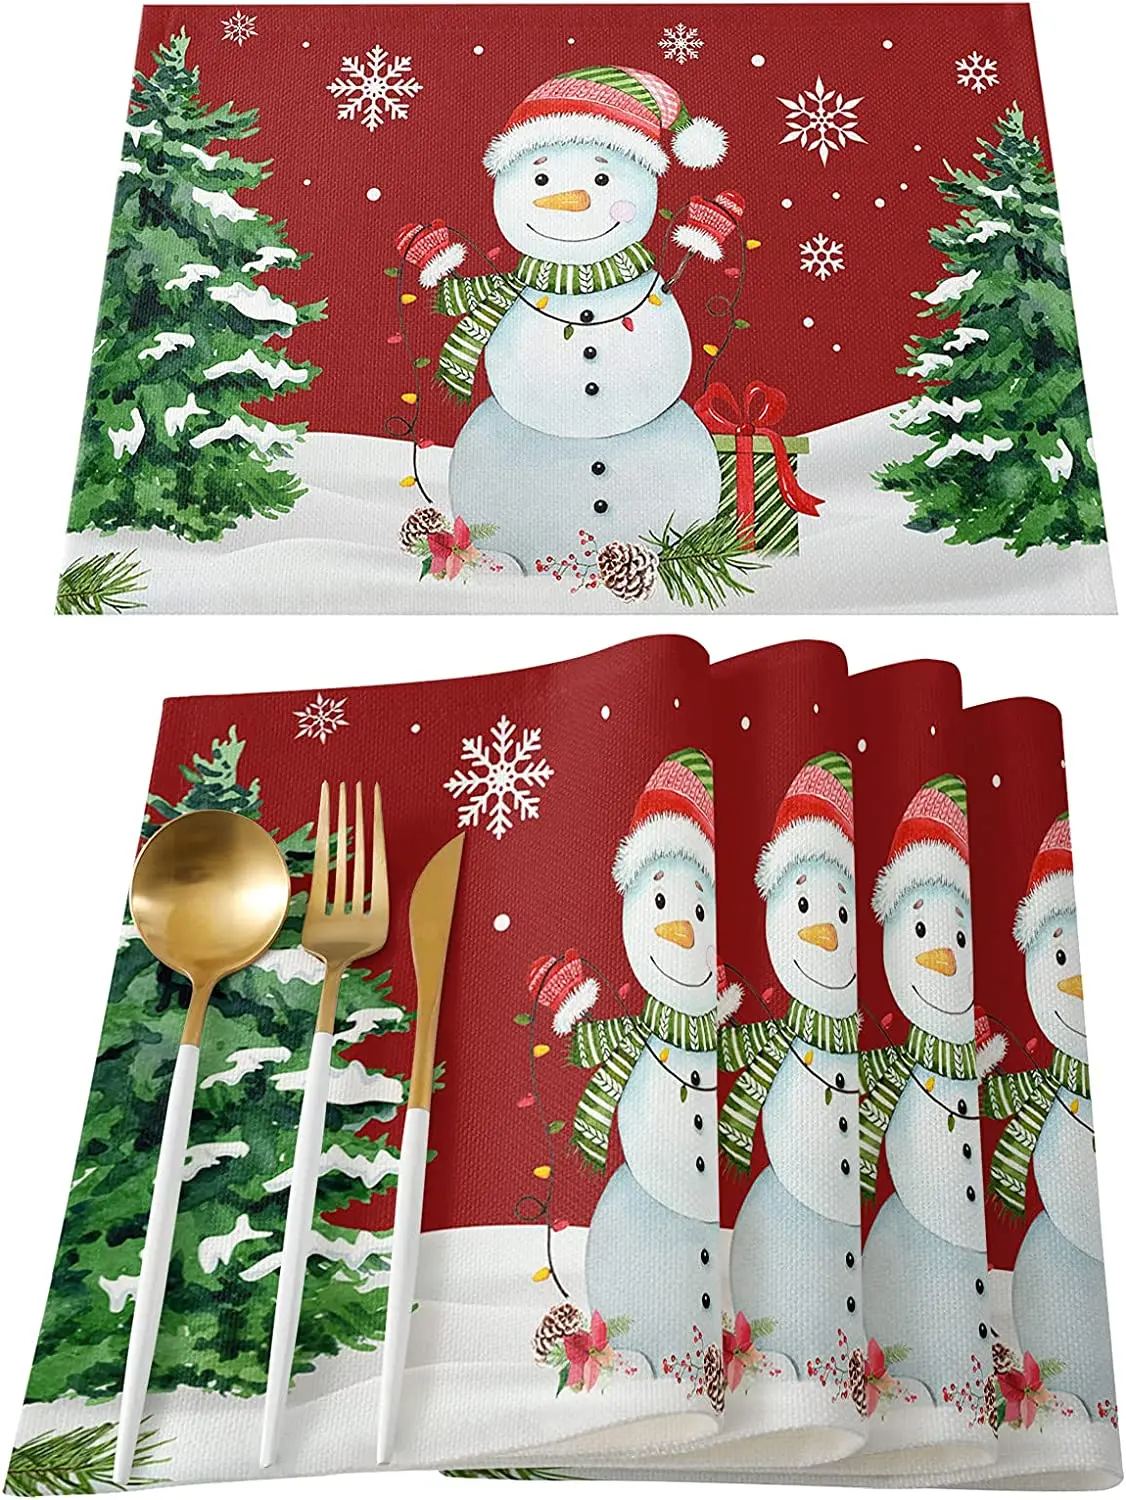 

Christmas Snowman Placemats Set of 4 for Dining Table Merry Snowflake Xmas Tree Durable Washable Non Slip Heat Place Mats